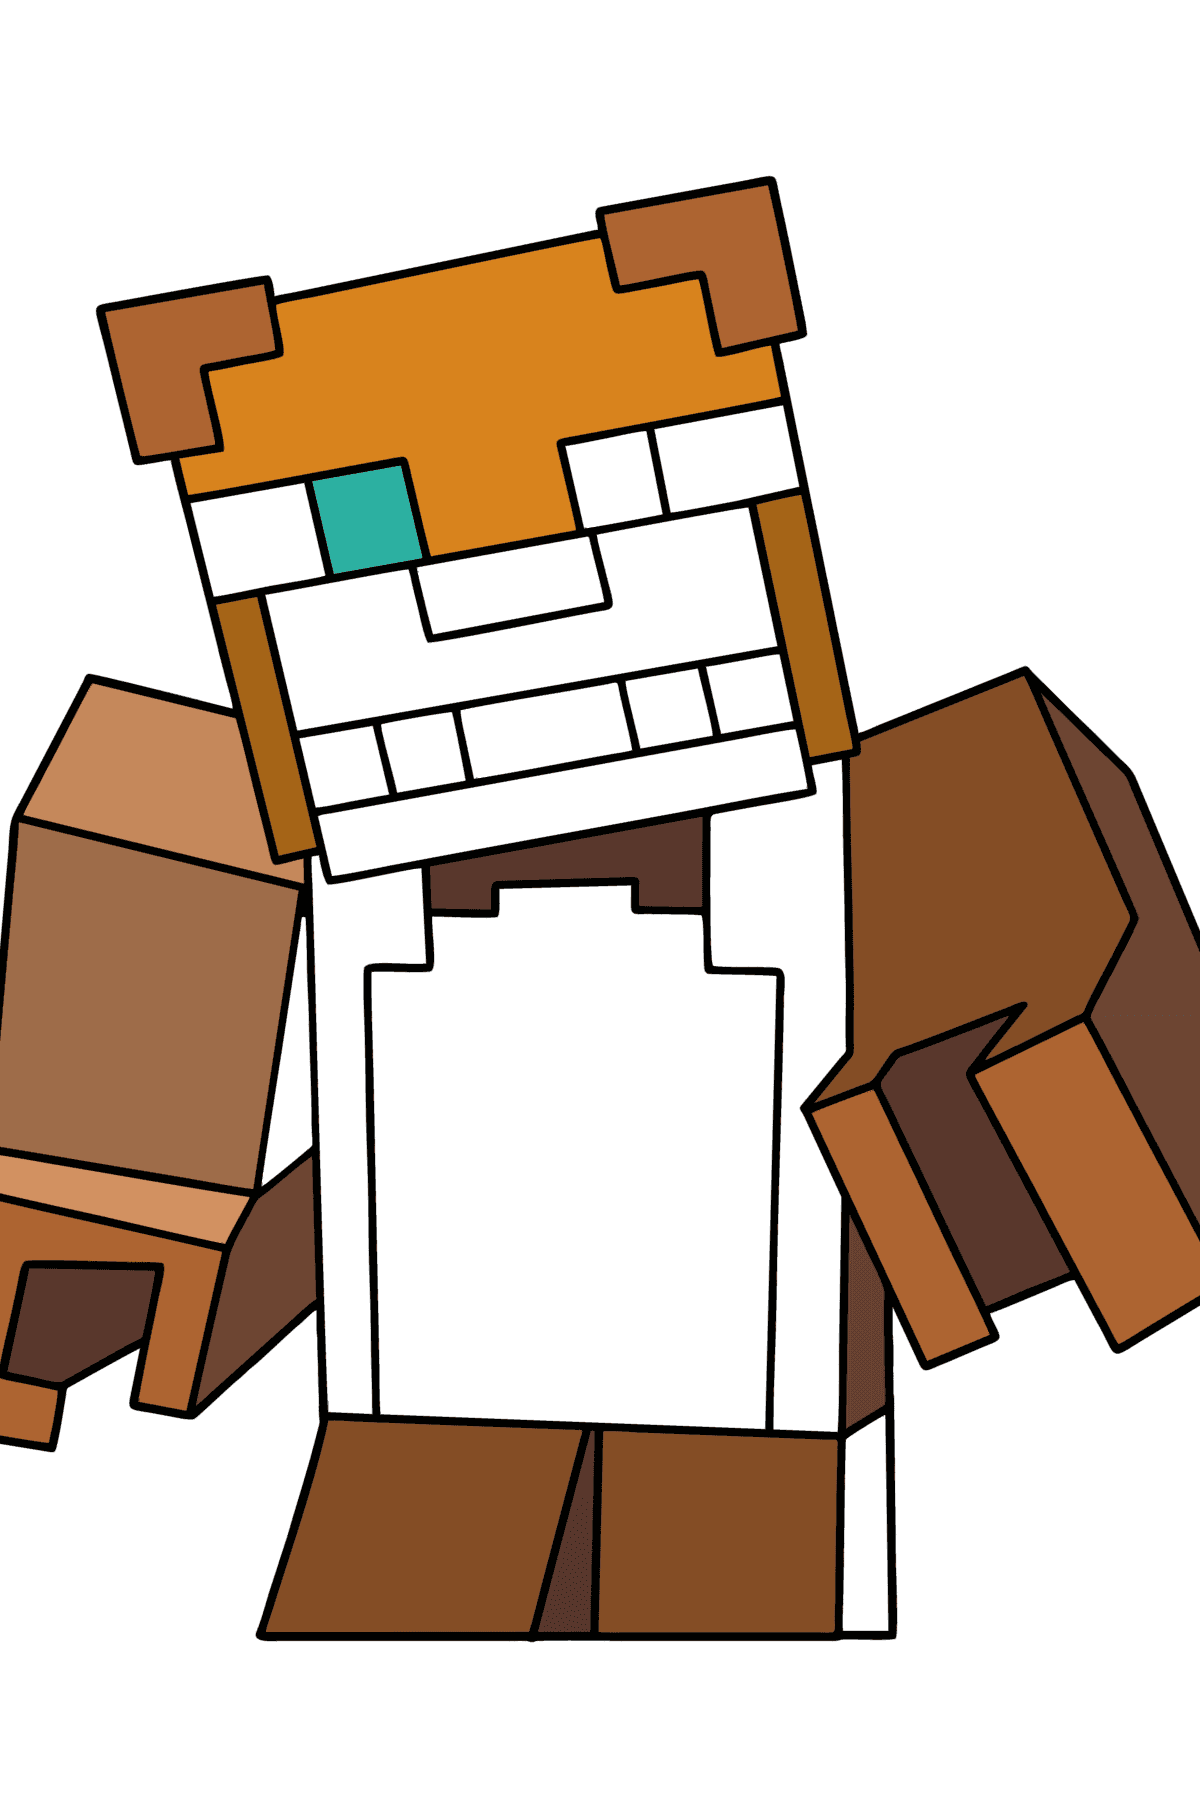 Minecraft Freddy coloring page - Coloring Pages for Kids